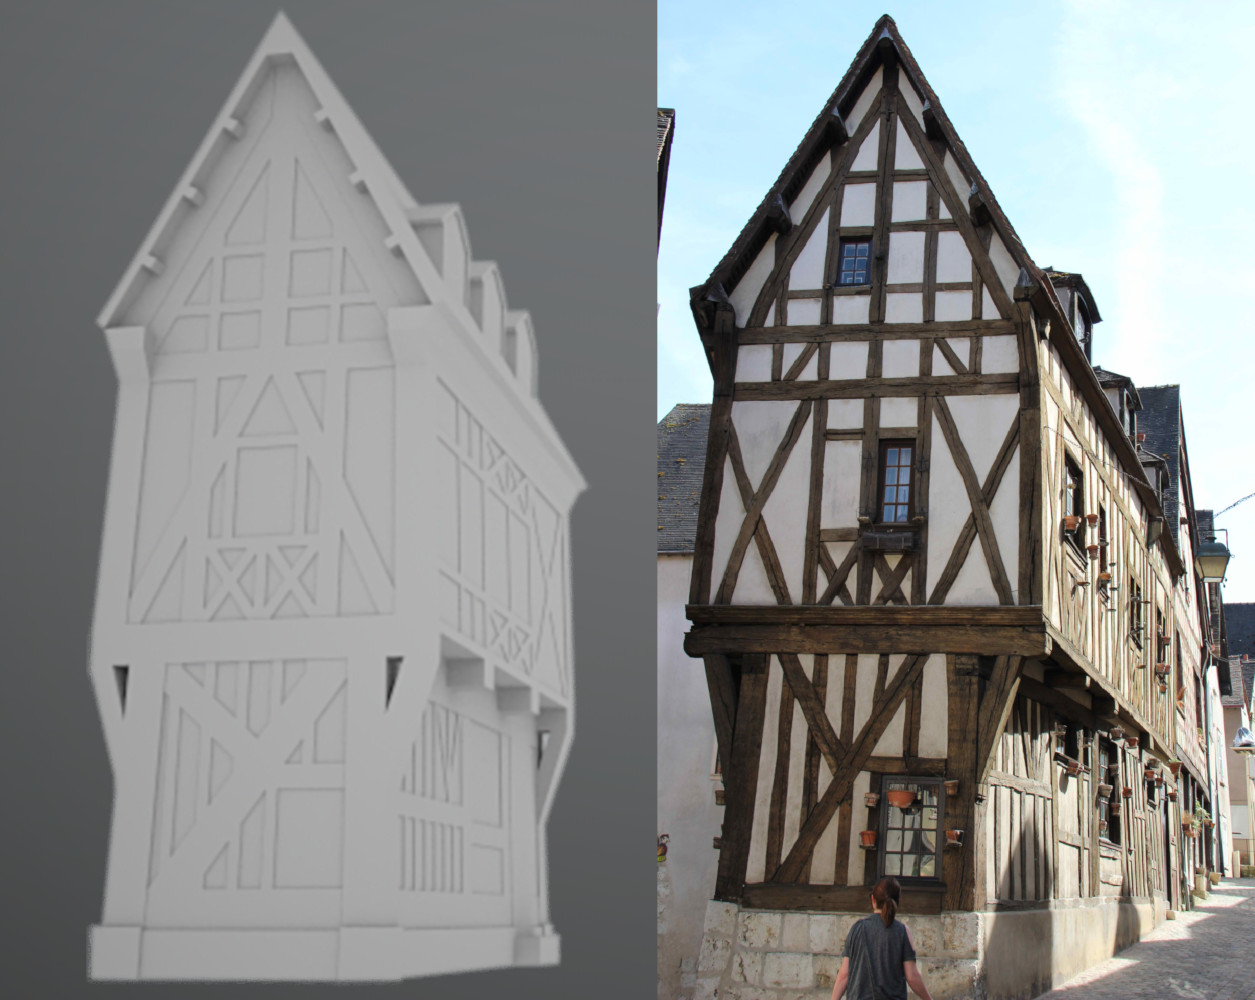 Workflow demonstrating the creation of a historical medieval european building model using digital 3D skills.